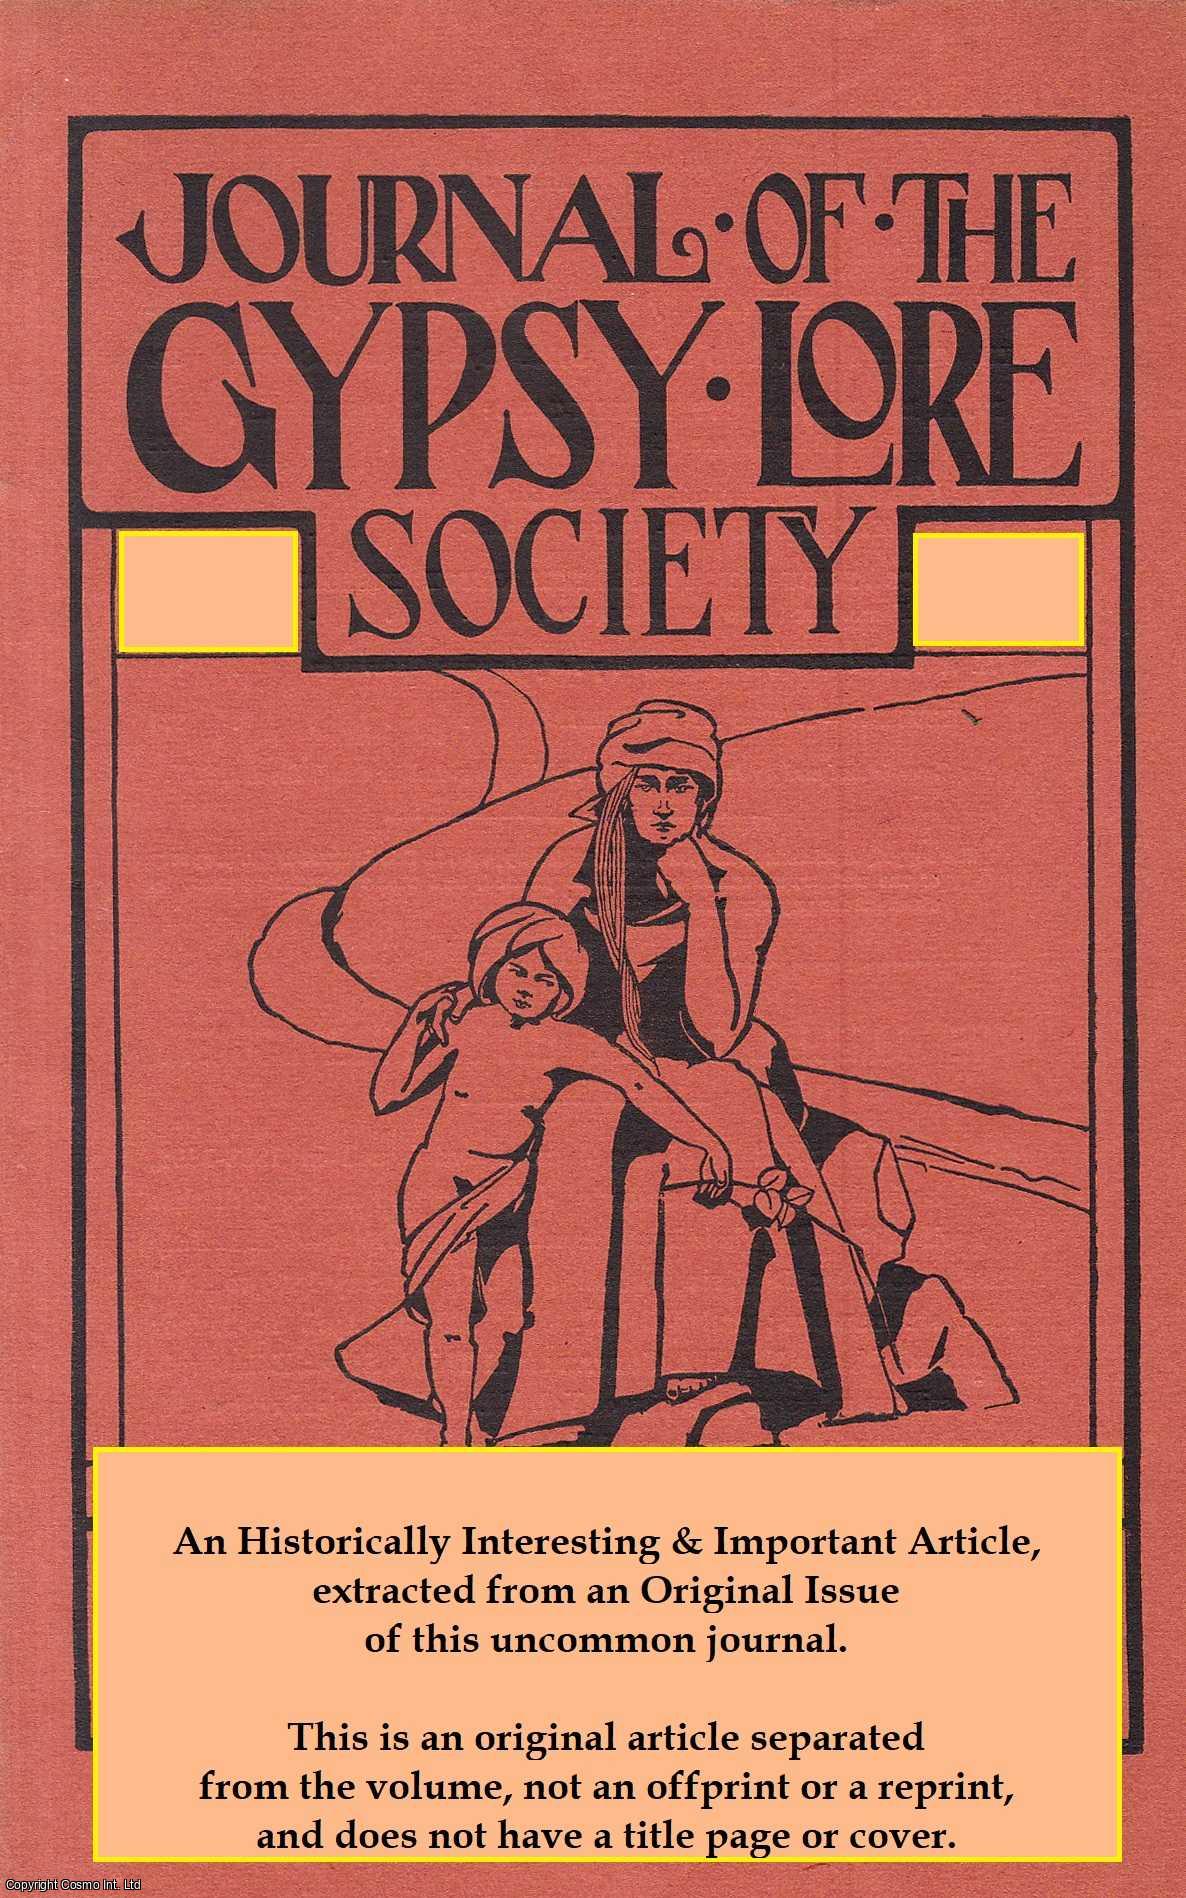 F. O'B. Adams - Johnny James : An Old Hampshire Gypsy. An uncommon original article from the Journal of the Gypsy Lore Society, 1965.